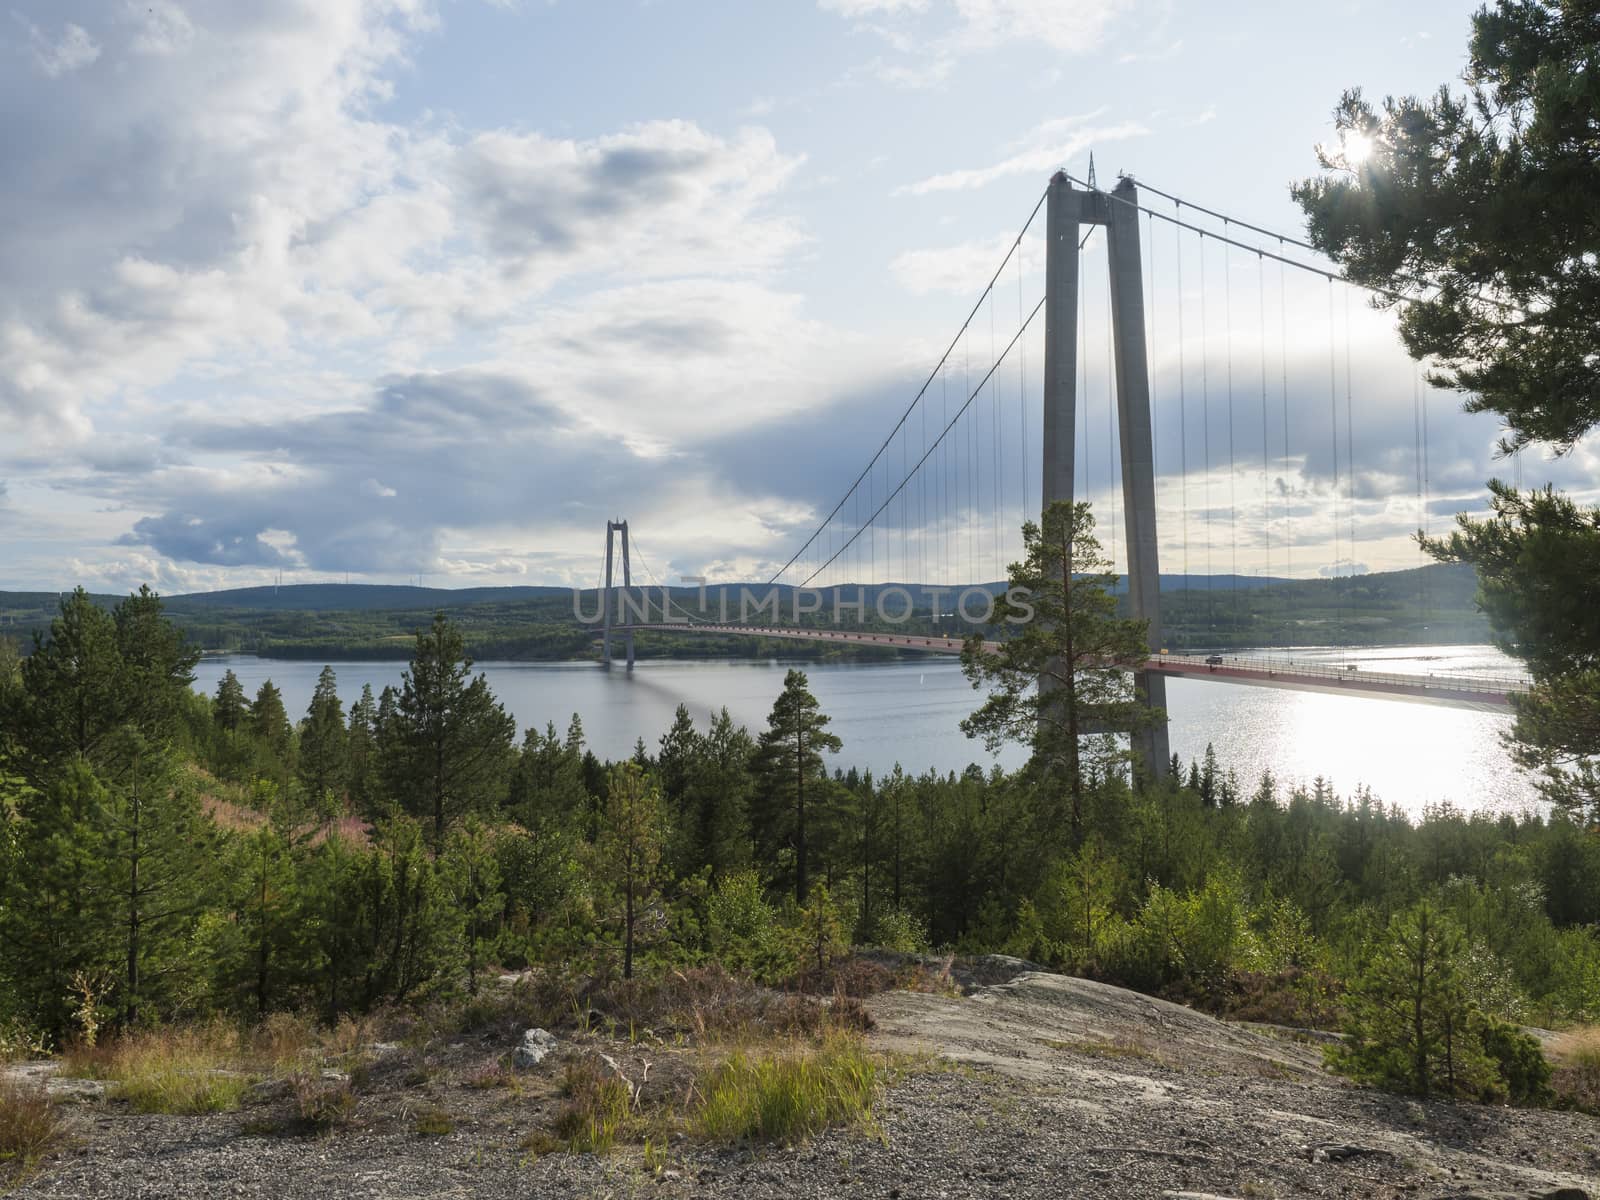 Summer view of the High coast bridge Hogakustenbron seen from the north bank of the river Angermanalven located near Harnosand in Vaesternorrland, Sweden